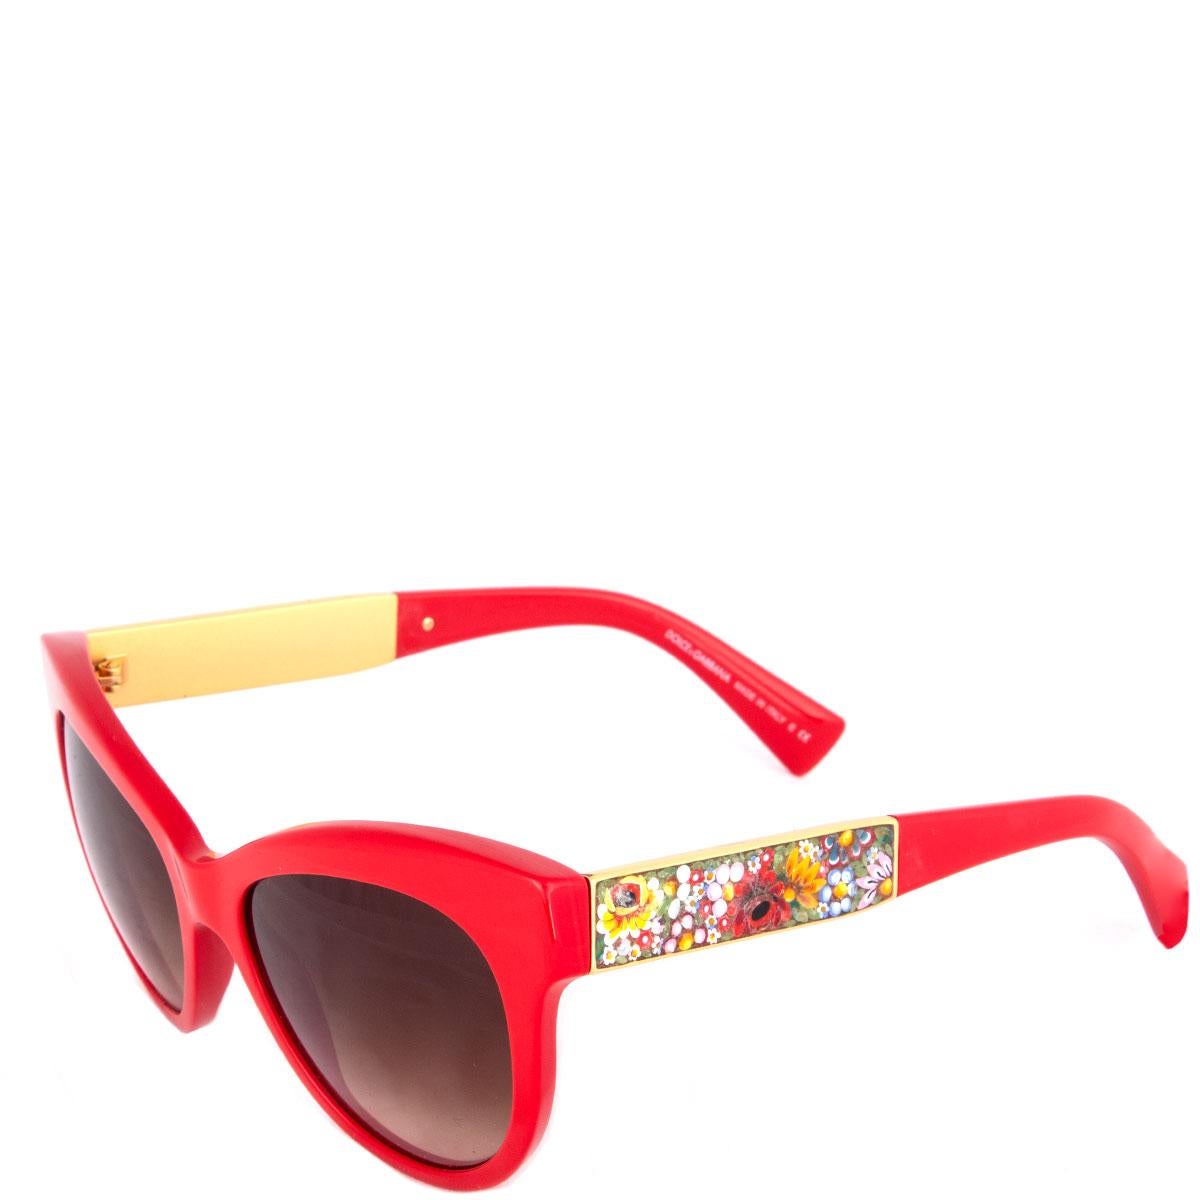 100% authentic Dolce & Gabbana 'DG 4215' cat-eye sunglasses in red acetate. Preciously decorated with a hand made floral micro-mosaic in Murano glass on temples fitted with brown gradient lenses. Have been worn and are in excellent condition. Come